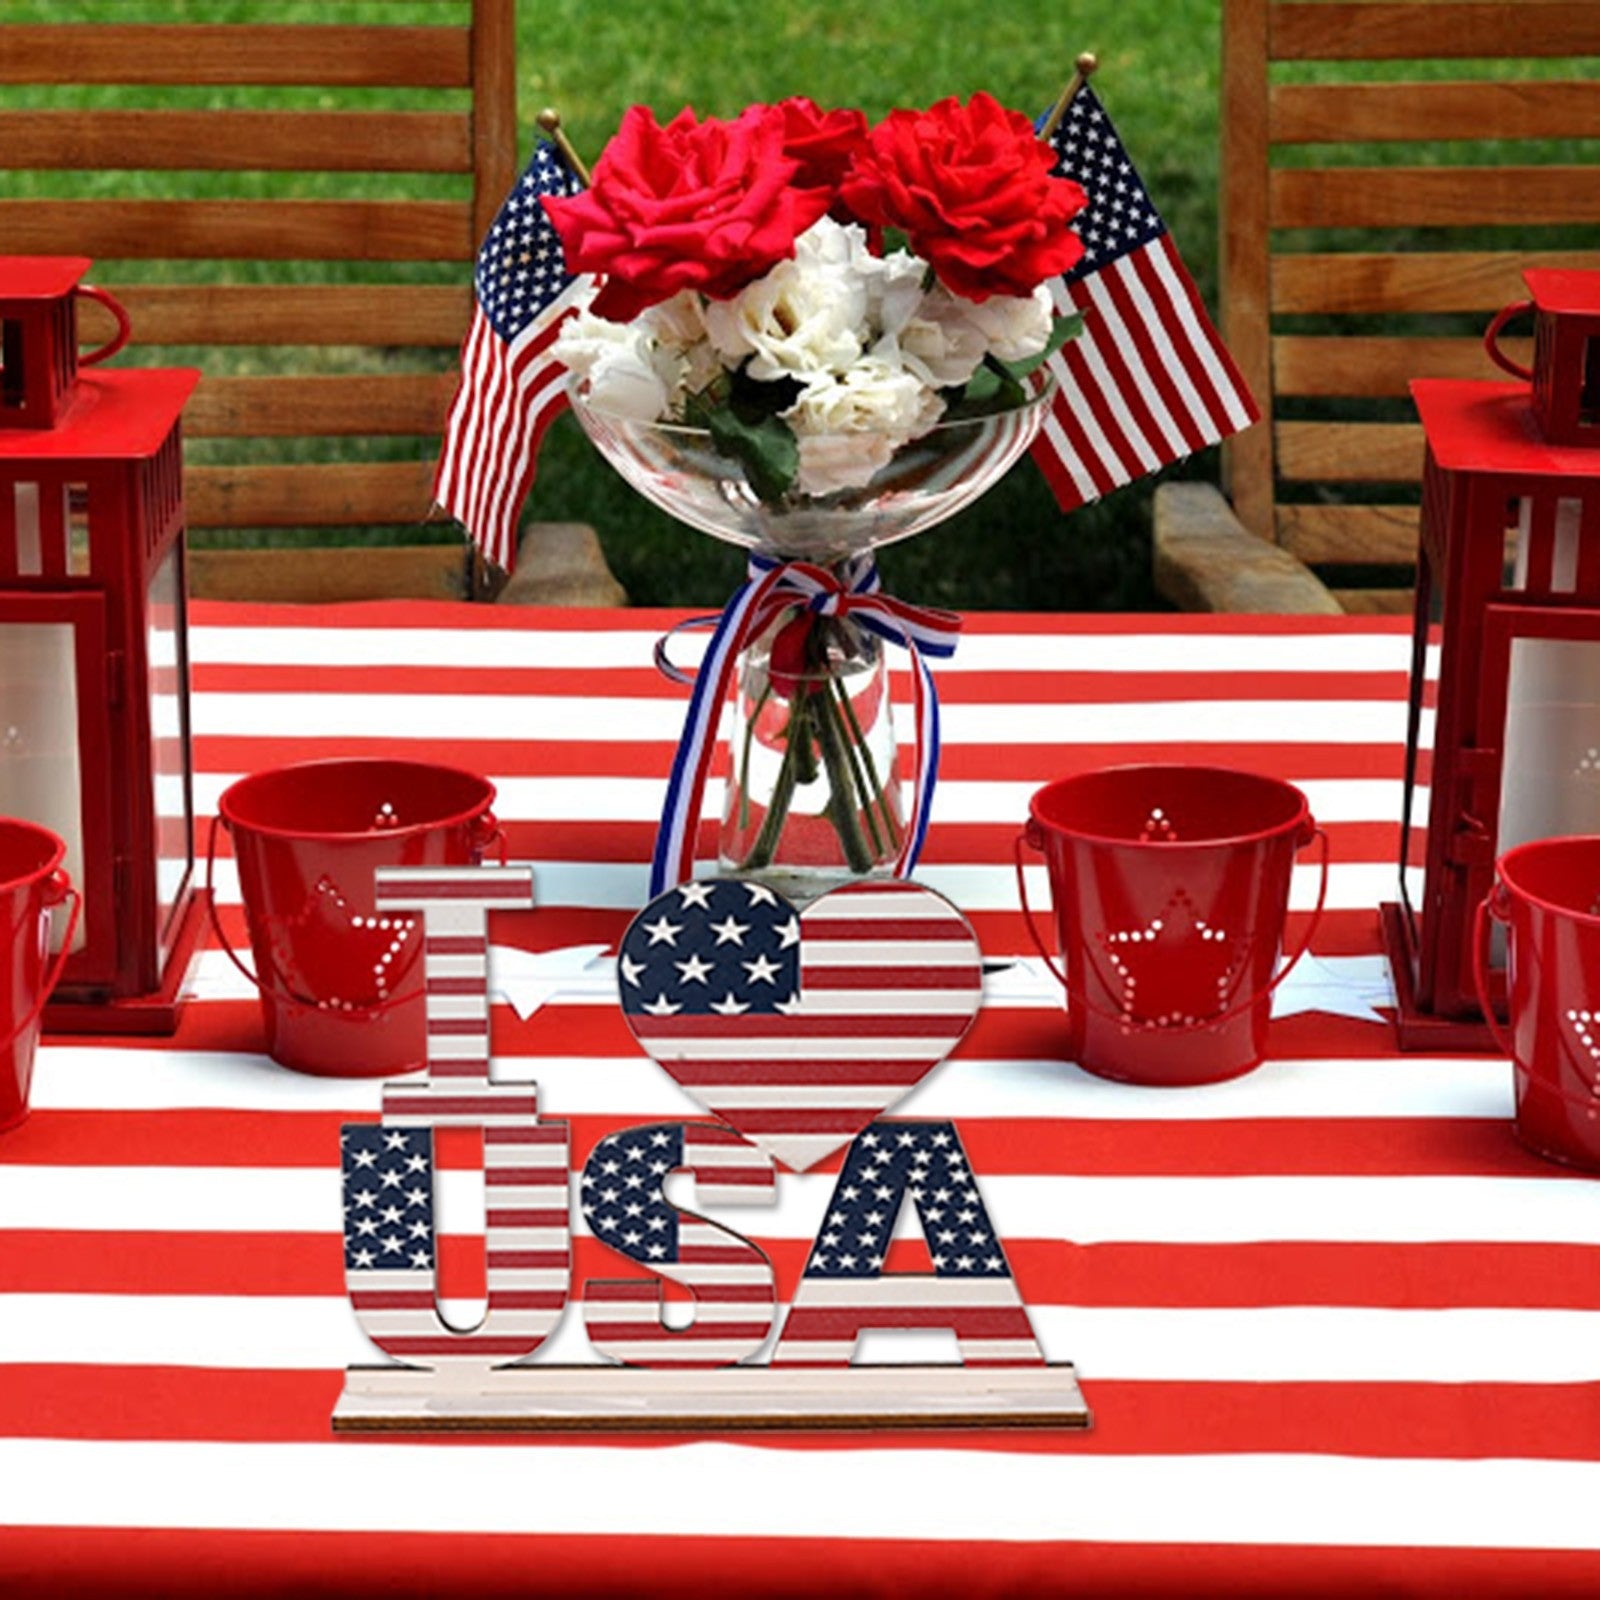 American Independence Day Decorations Wood, 4th of July decorations, American flag decorations, Patriotic decorations, Red, white and blue decorations, July 4th wreaths, July 4th garlands, July 4th centerpieces